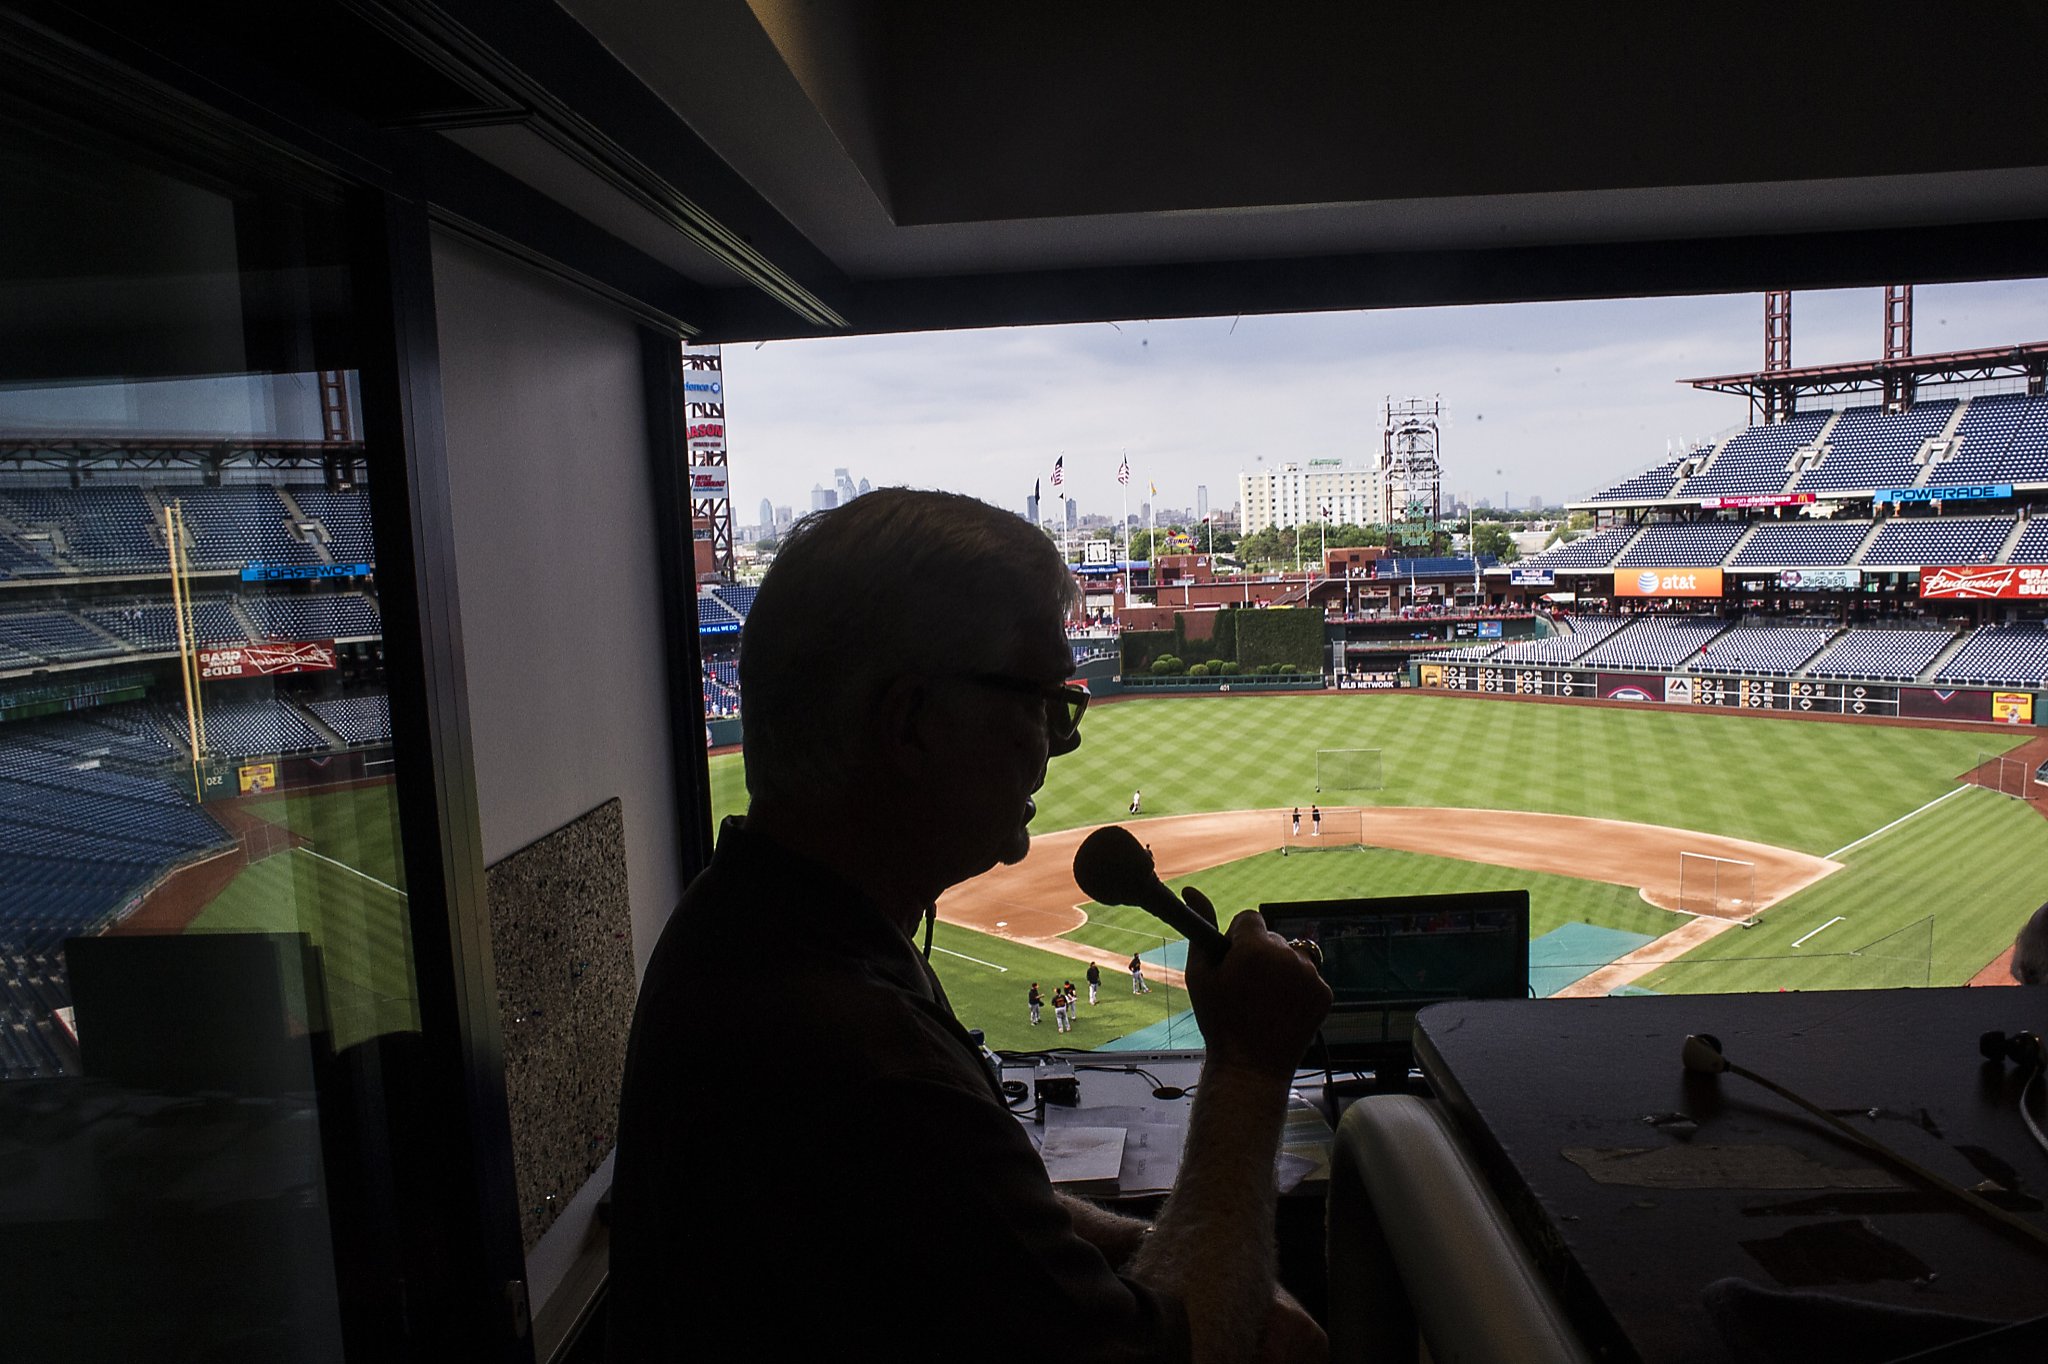 Giants broadcaster Mike Krukow thinks shorter commercial breaks, advertising  on uniforms could help speed up pace of play